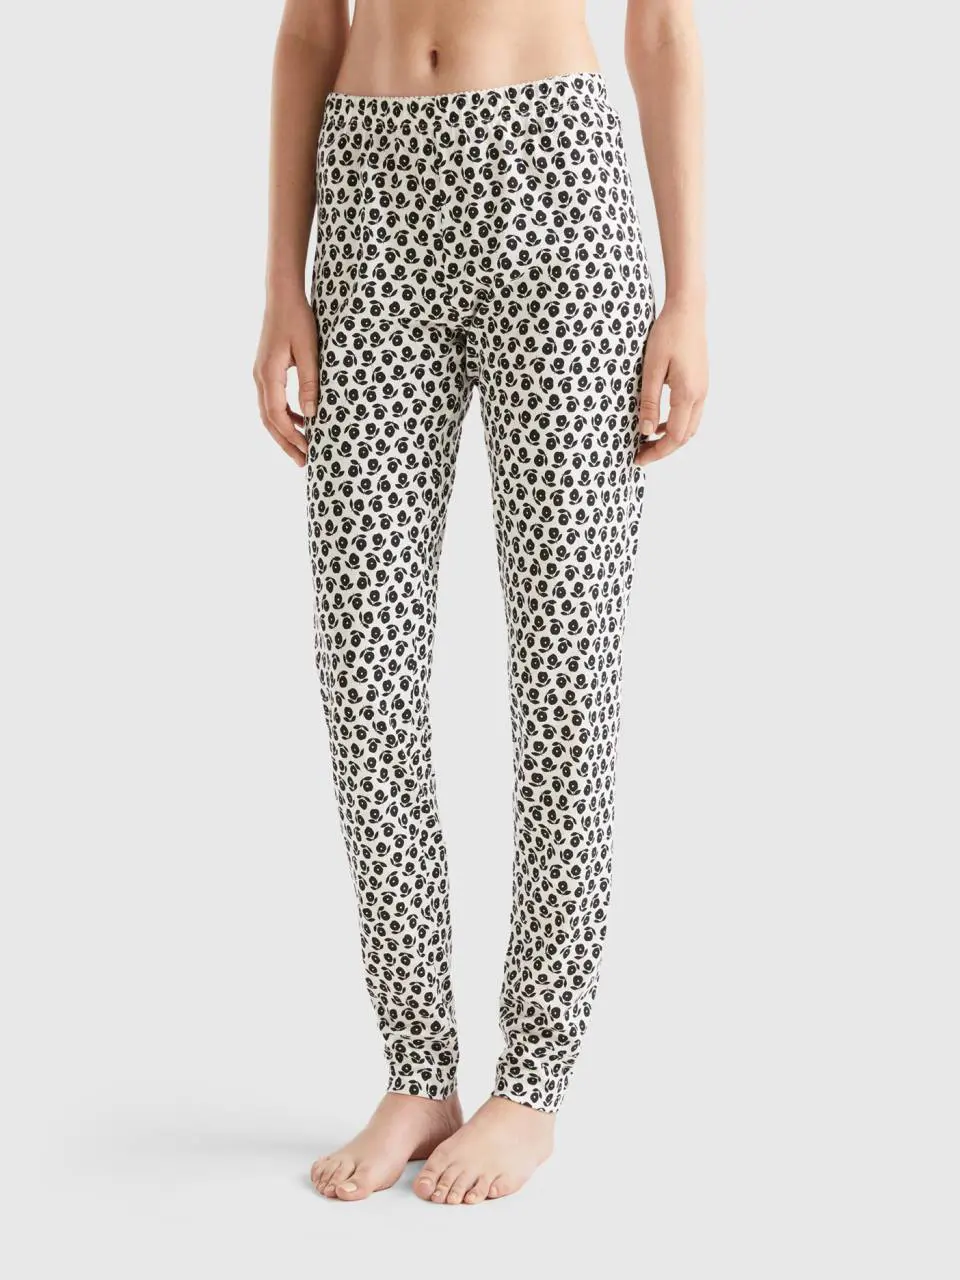 Benetton trousers with flower print. 1